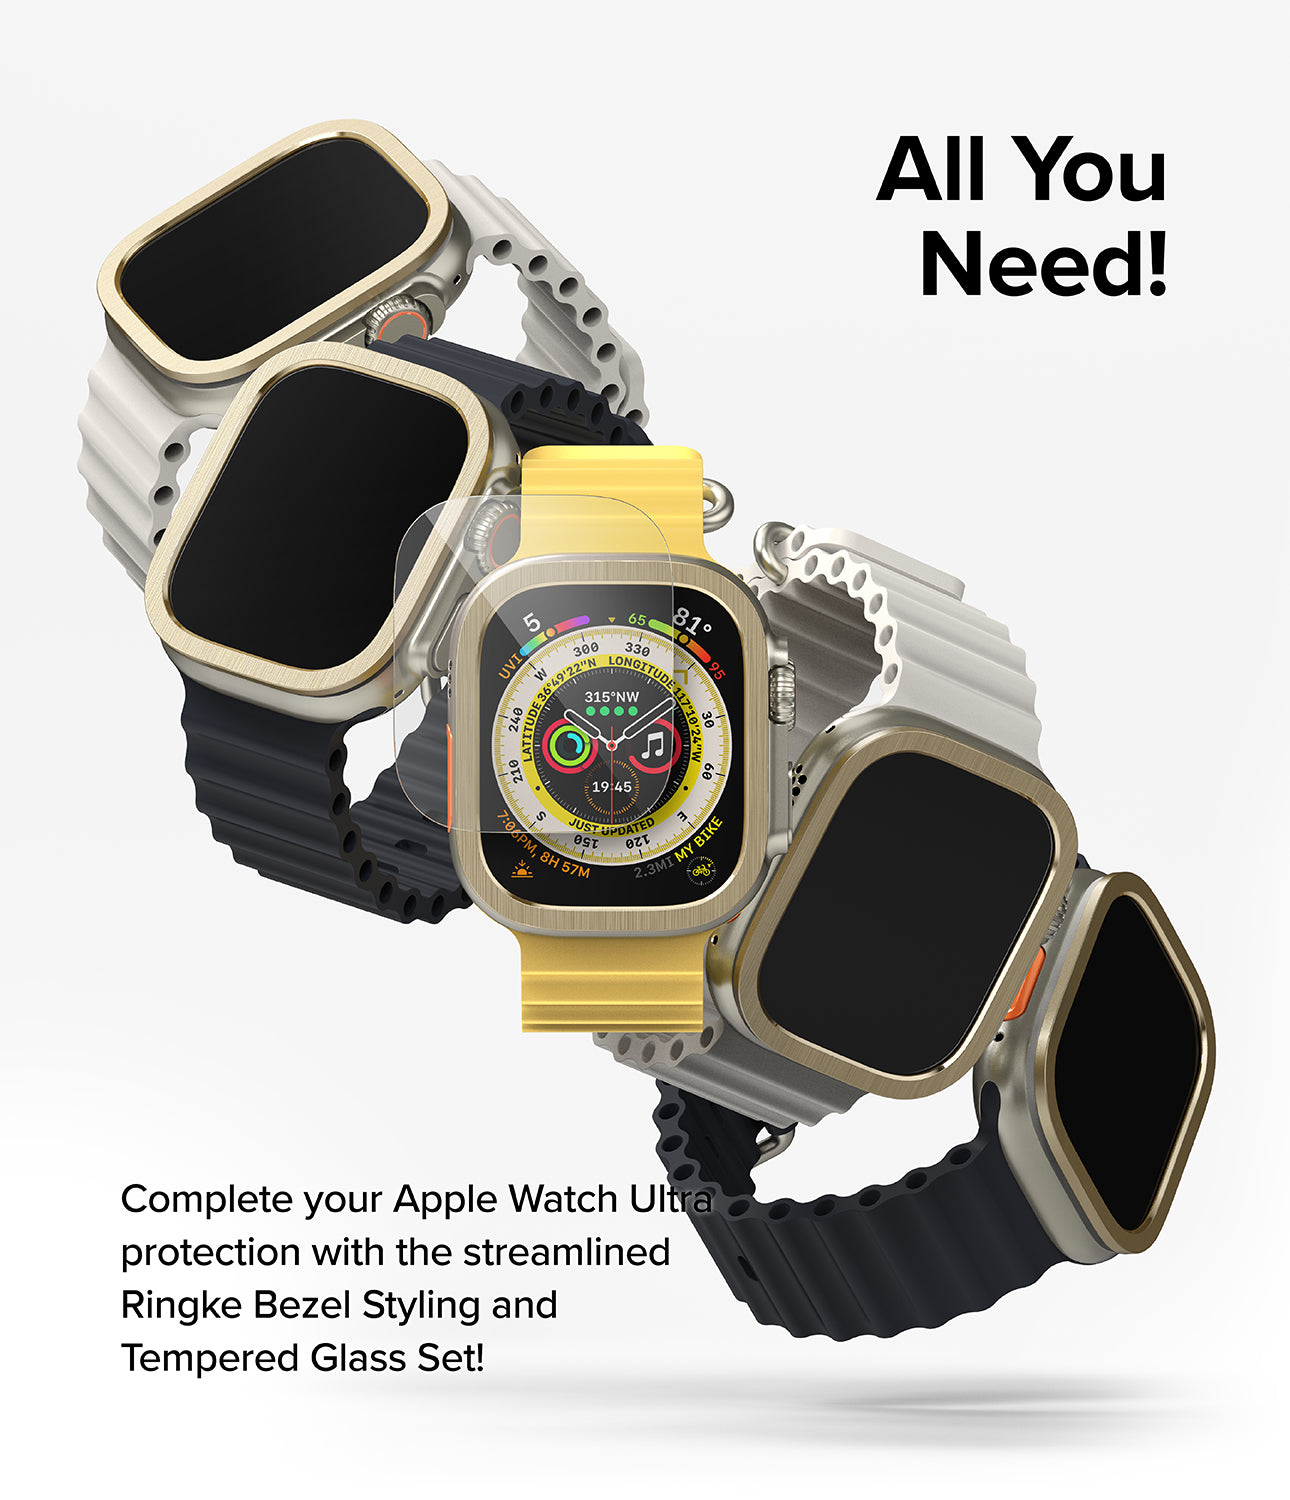 All You Need! Complete your Apple Watch Ultra protection with the streamlined Ringke Bezel Styling and Tempered Glass set!